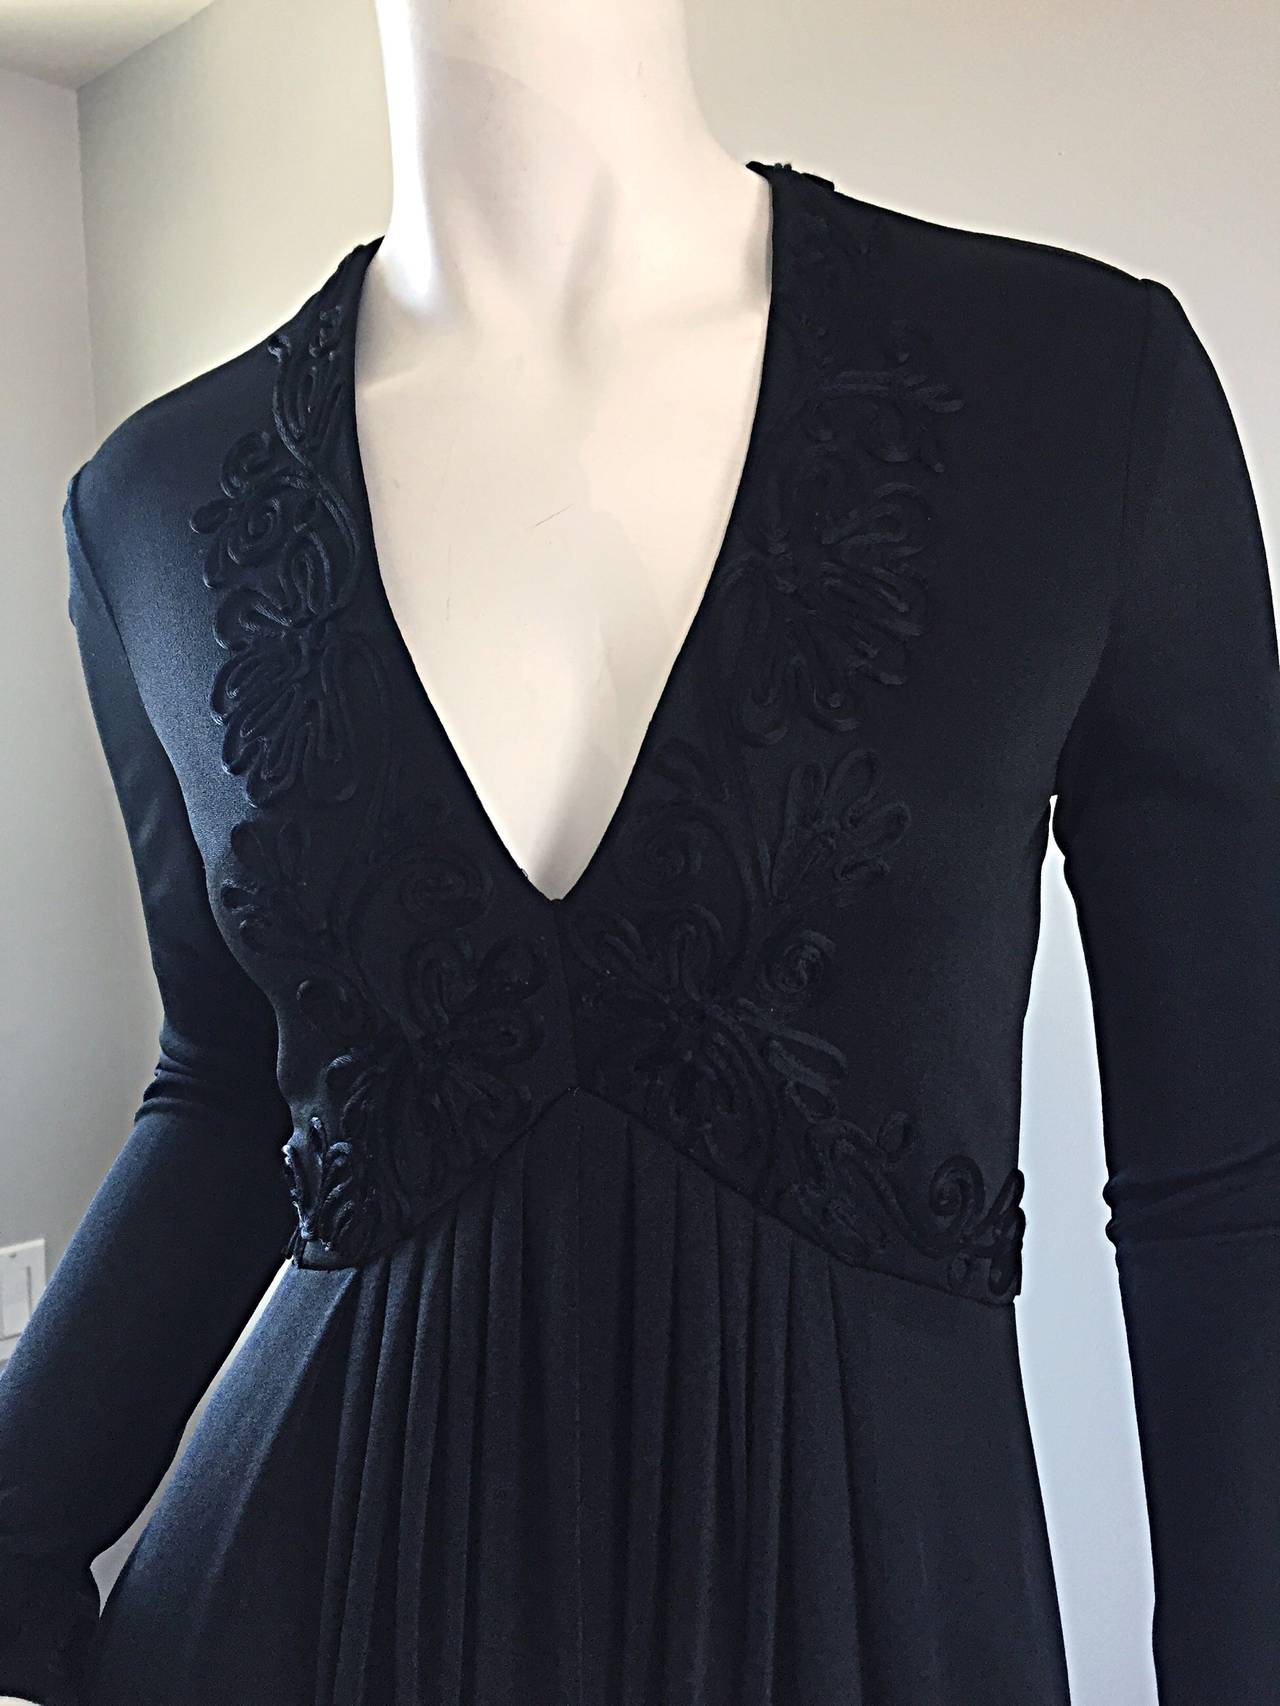 The perfect black maxi dress, by Jack Bryan! This jet black jersey dress features embroidery on the flattering bust, and continue onto the waist around the front and back. Sleek long sleeves, with a hidden zipper up the back, and hook-and-eye at top